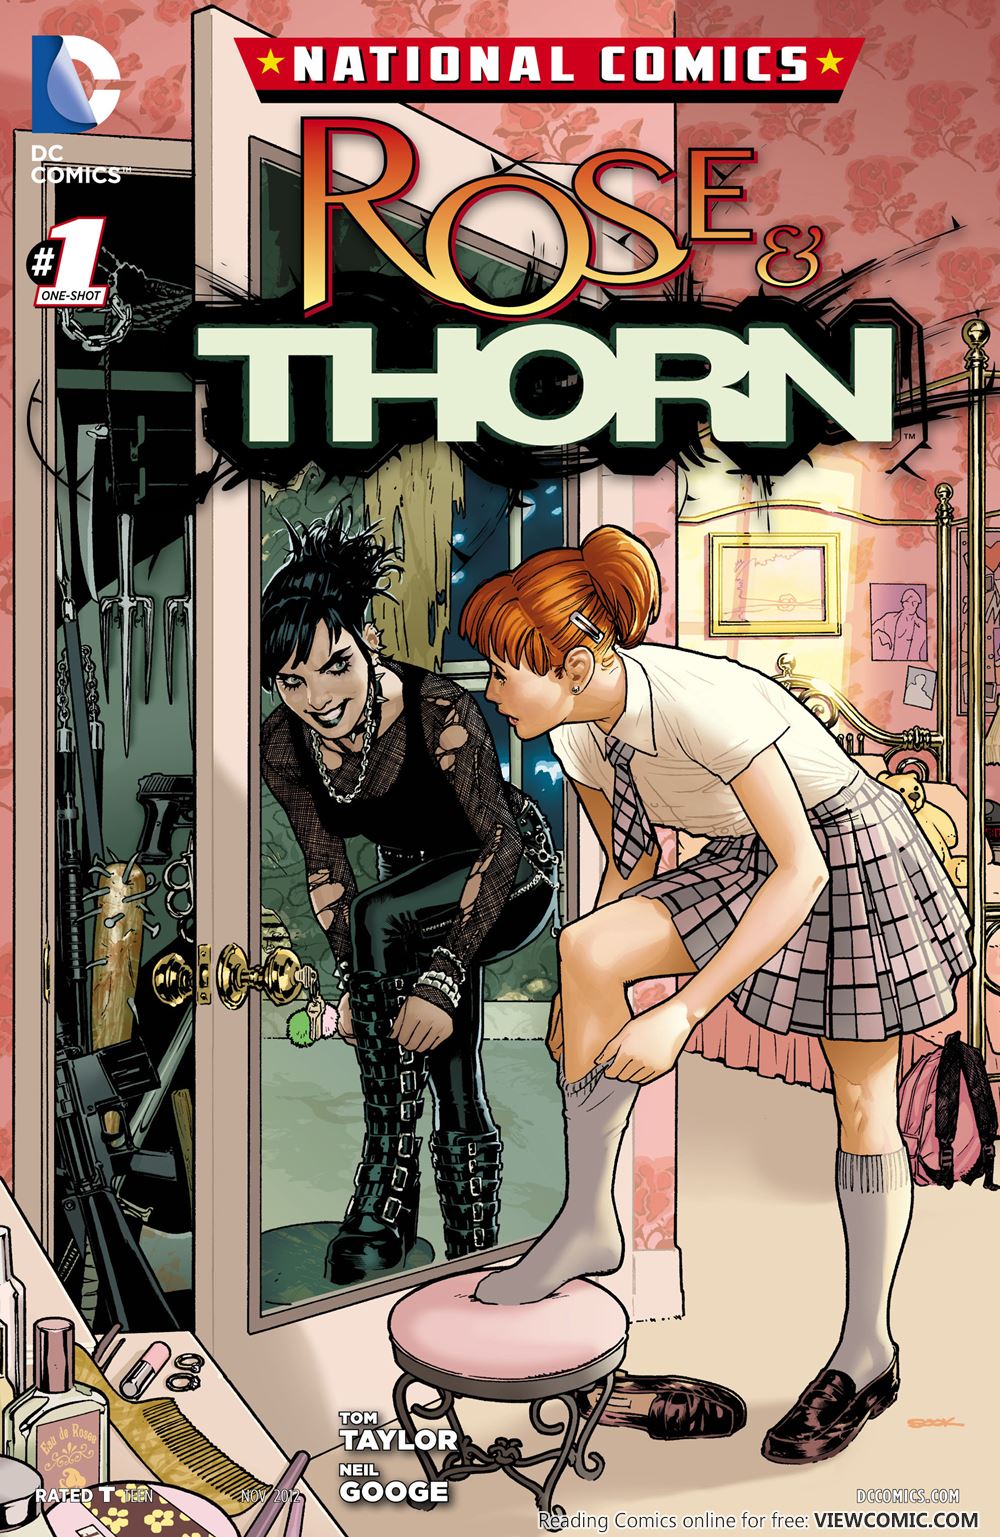 National Comics - Rose and Thorn 001 (2012). 